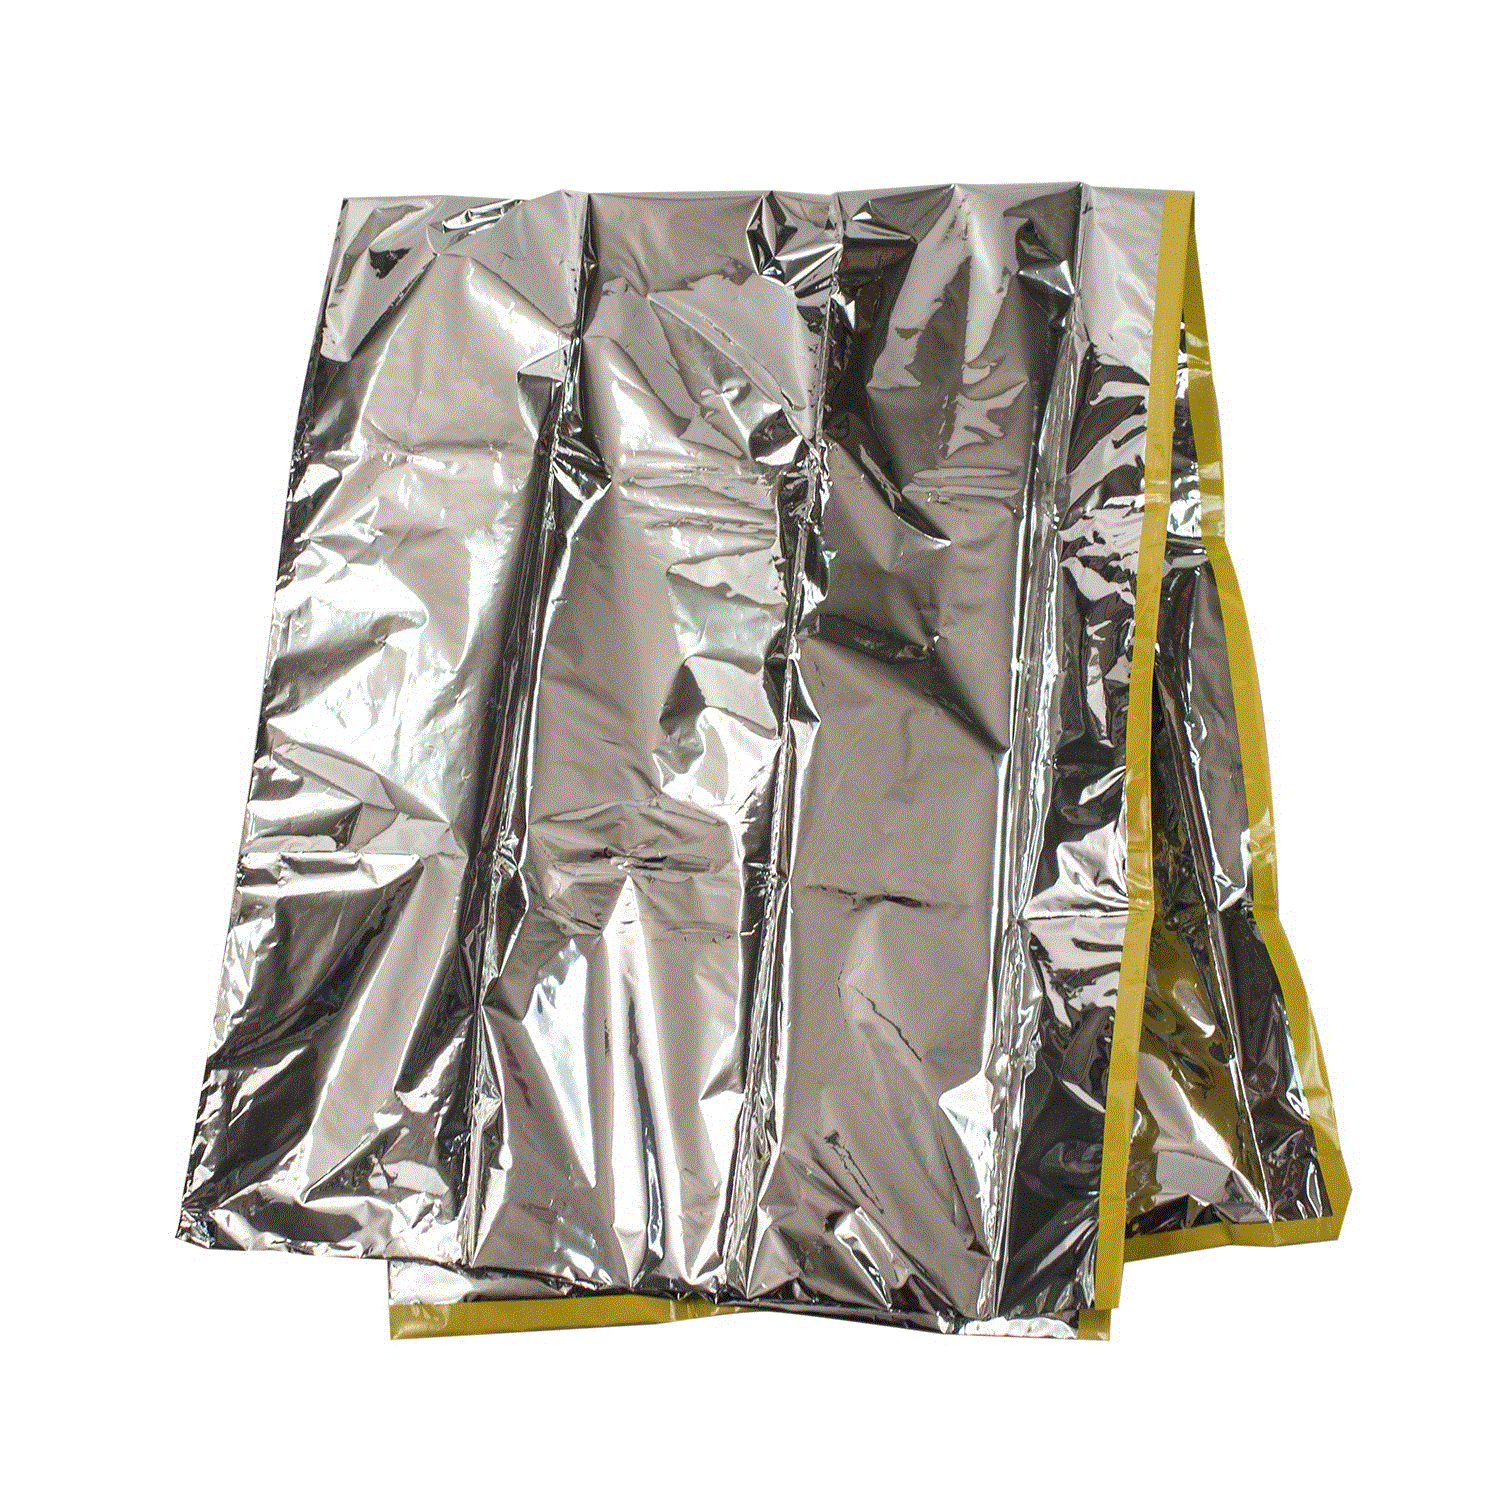 Foil & Survival Blankets Products, Supplies and Equipment